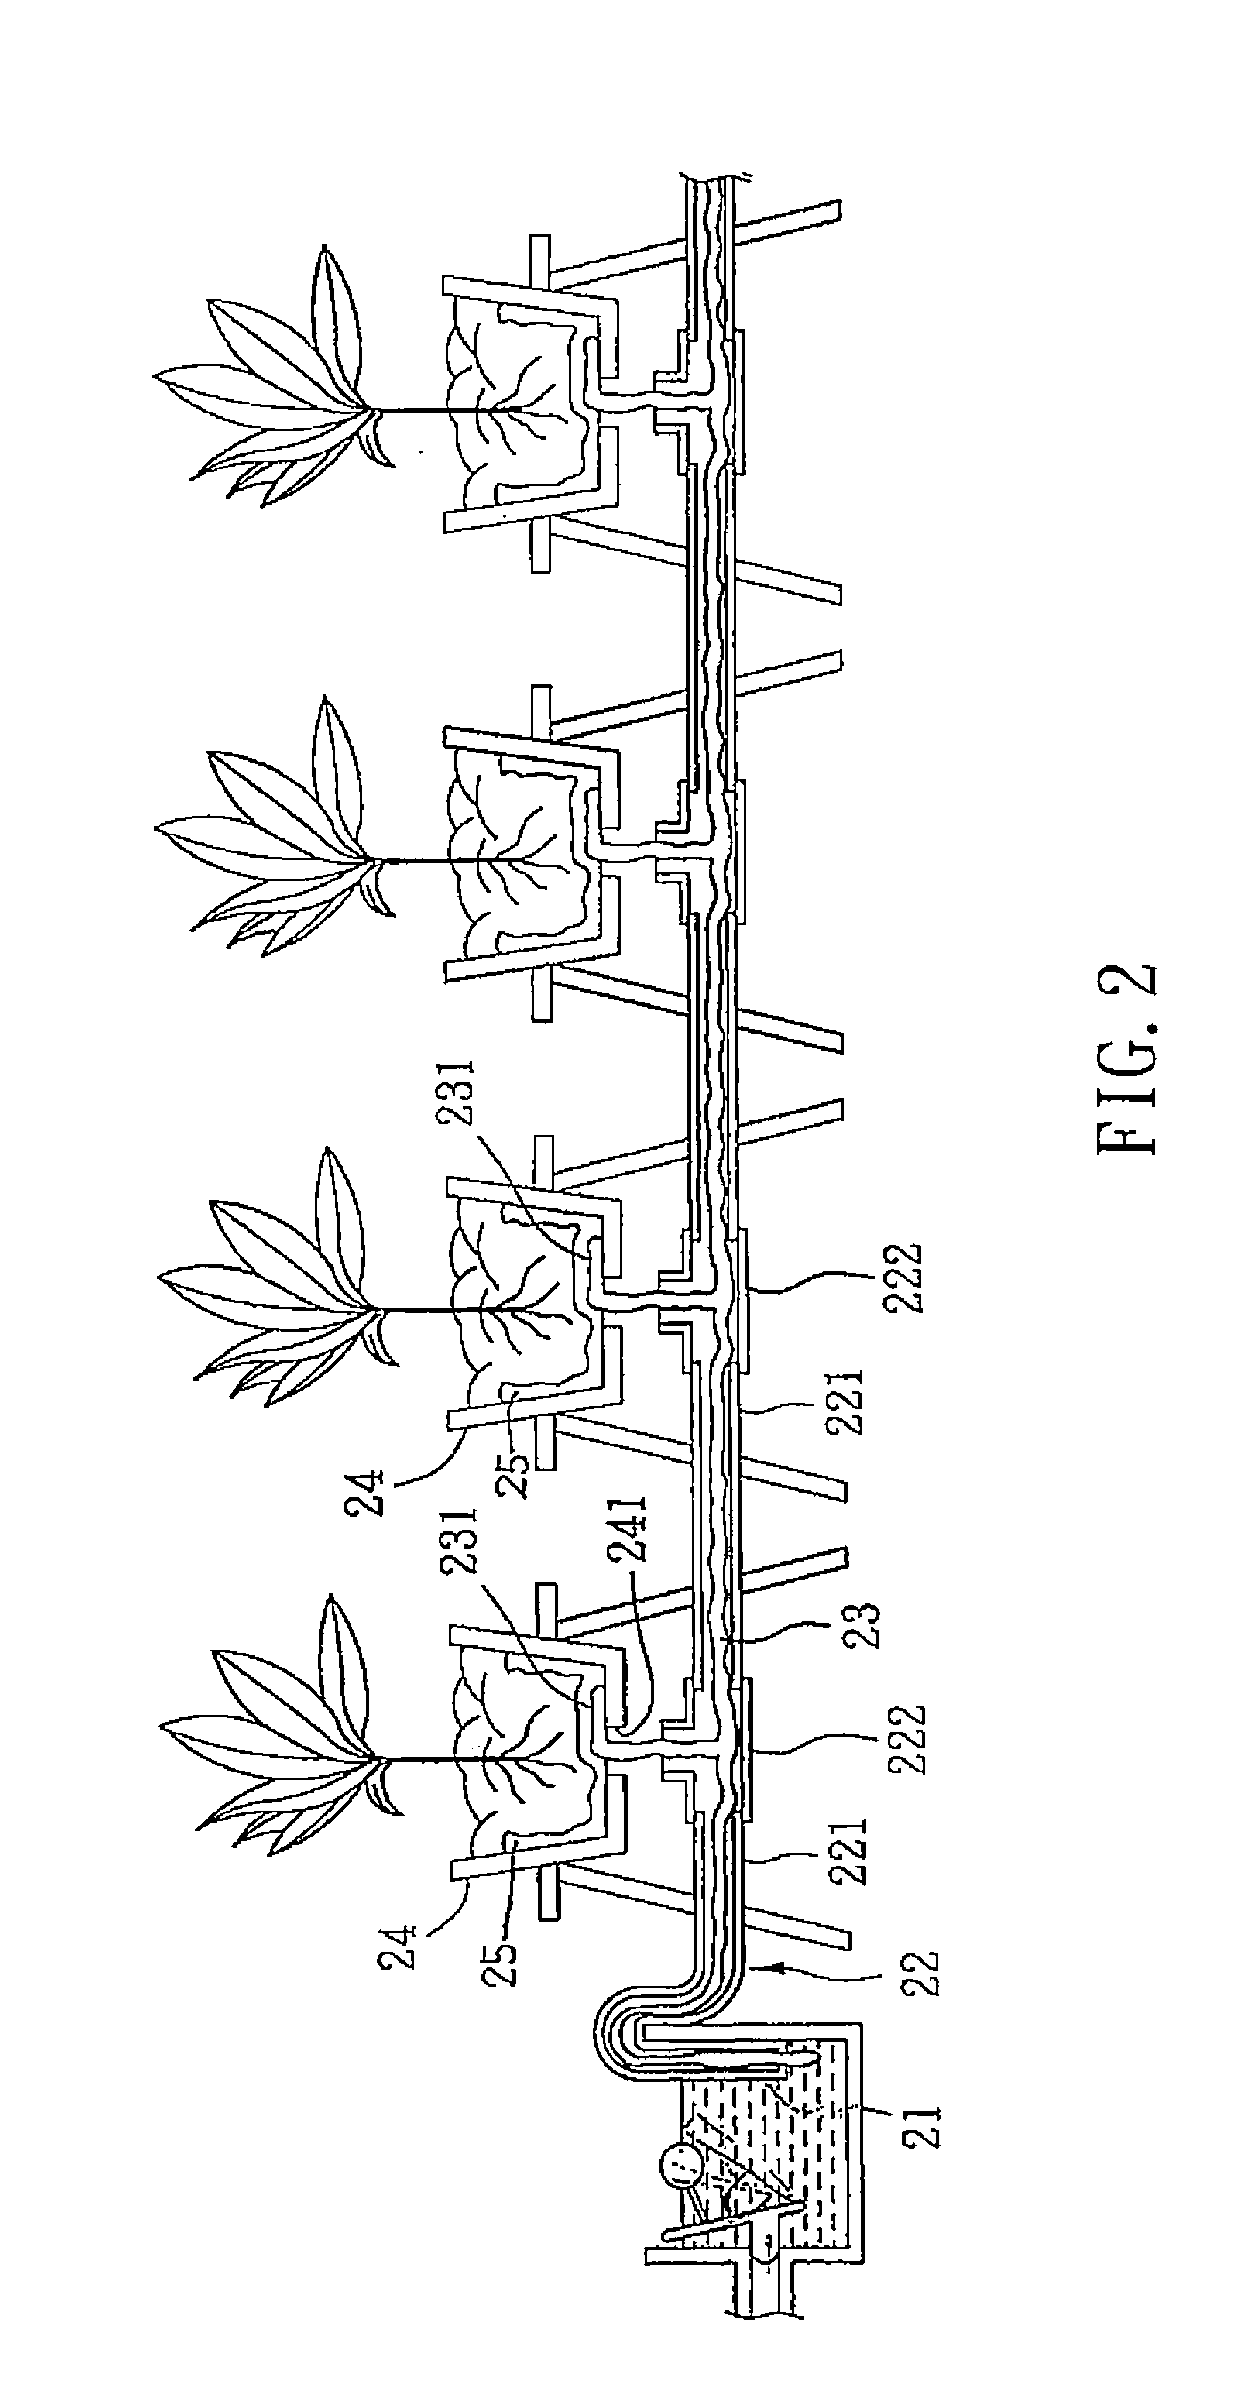 Closed capillary water distribution system for planters